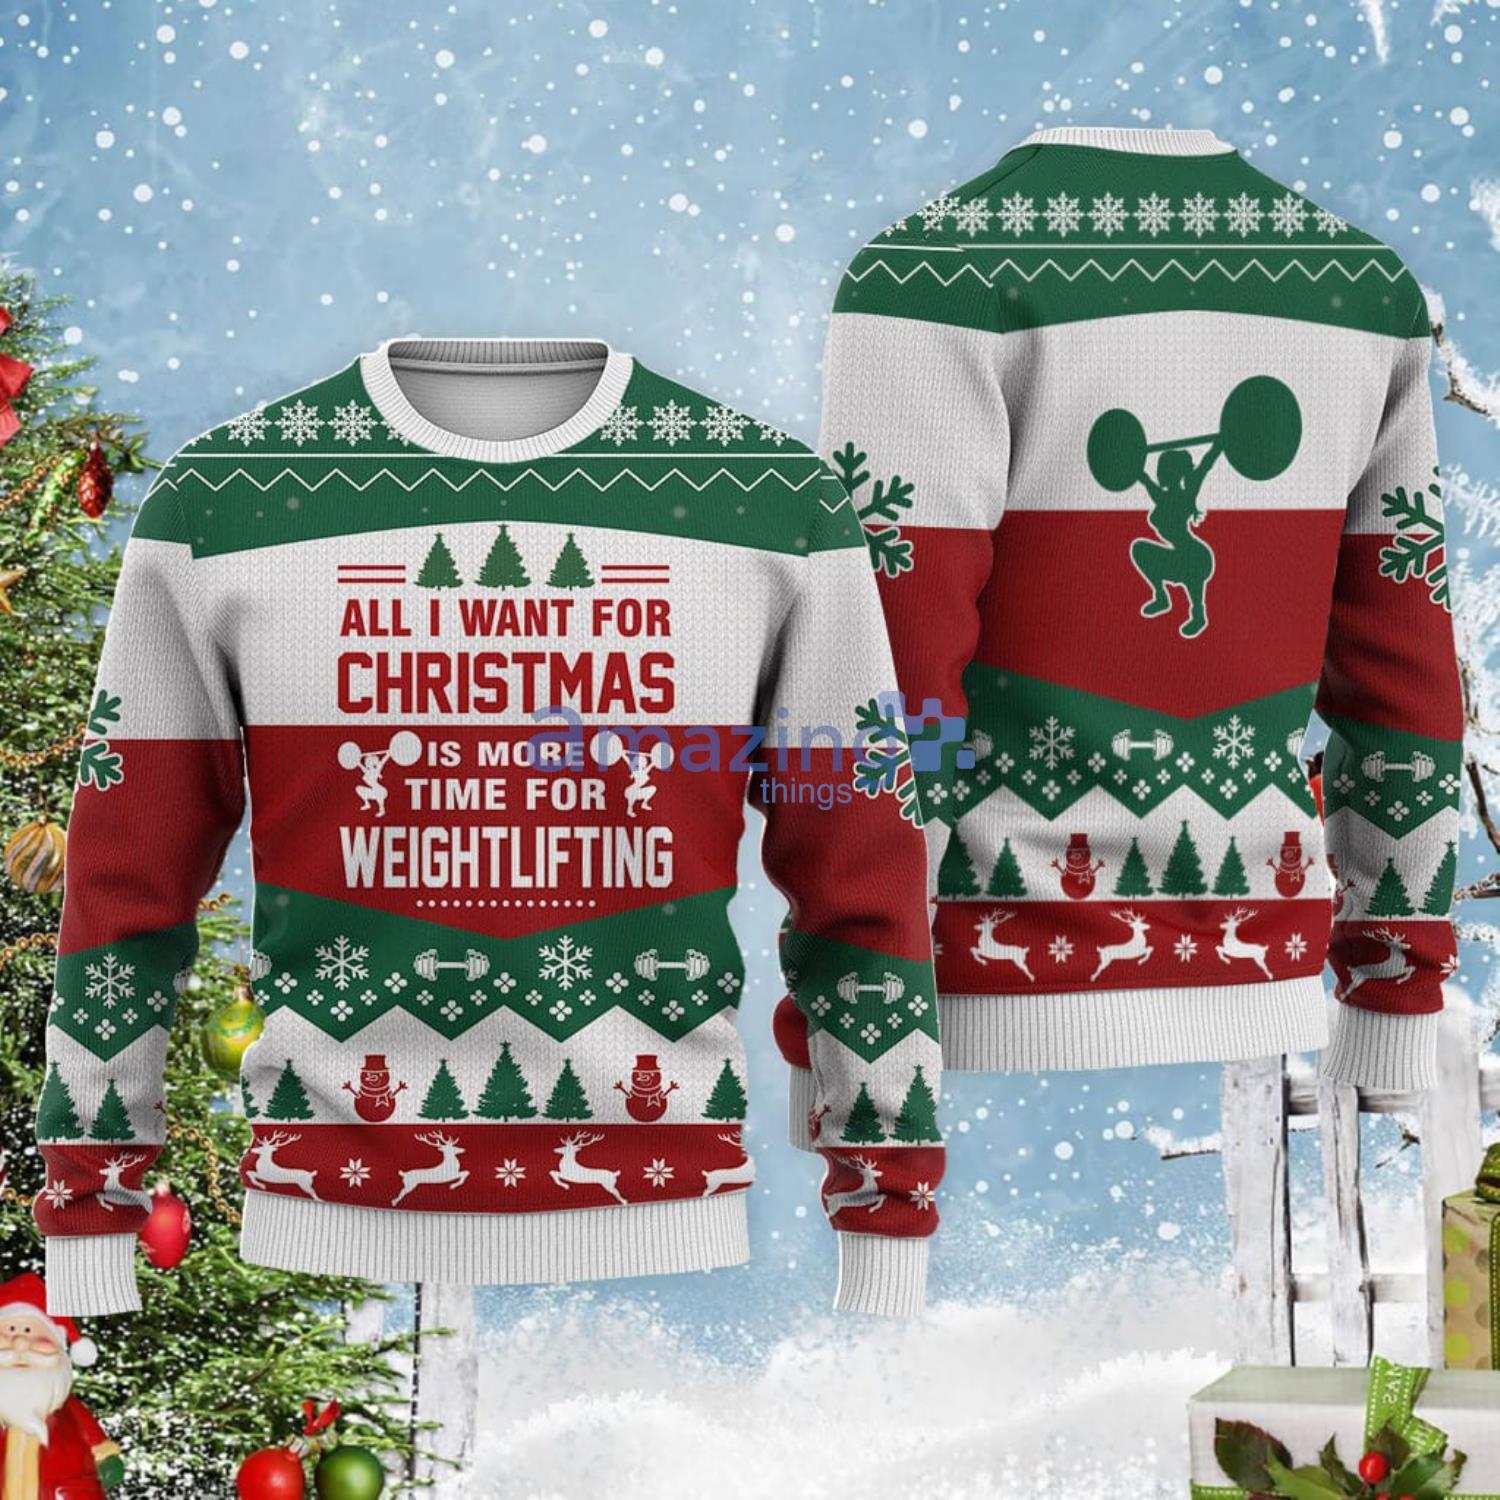 https://image.whatamazingthings.com/2022/11/all-i-want-for-christmas-is-weightlifting-christmas-gift-ugly-christmas-sweater.jpg